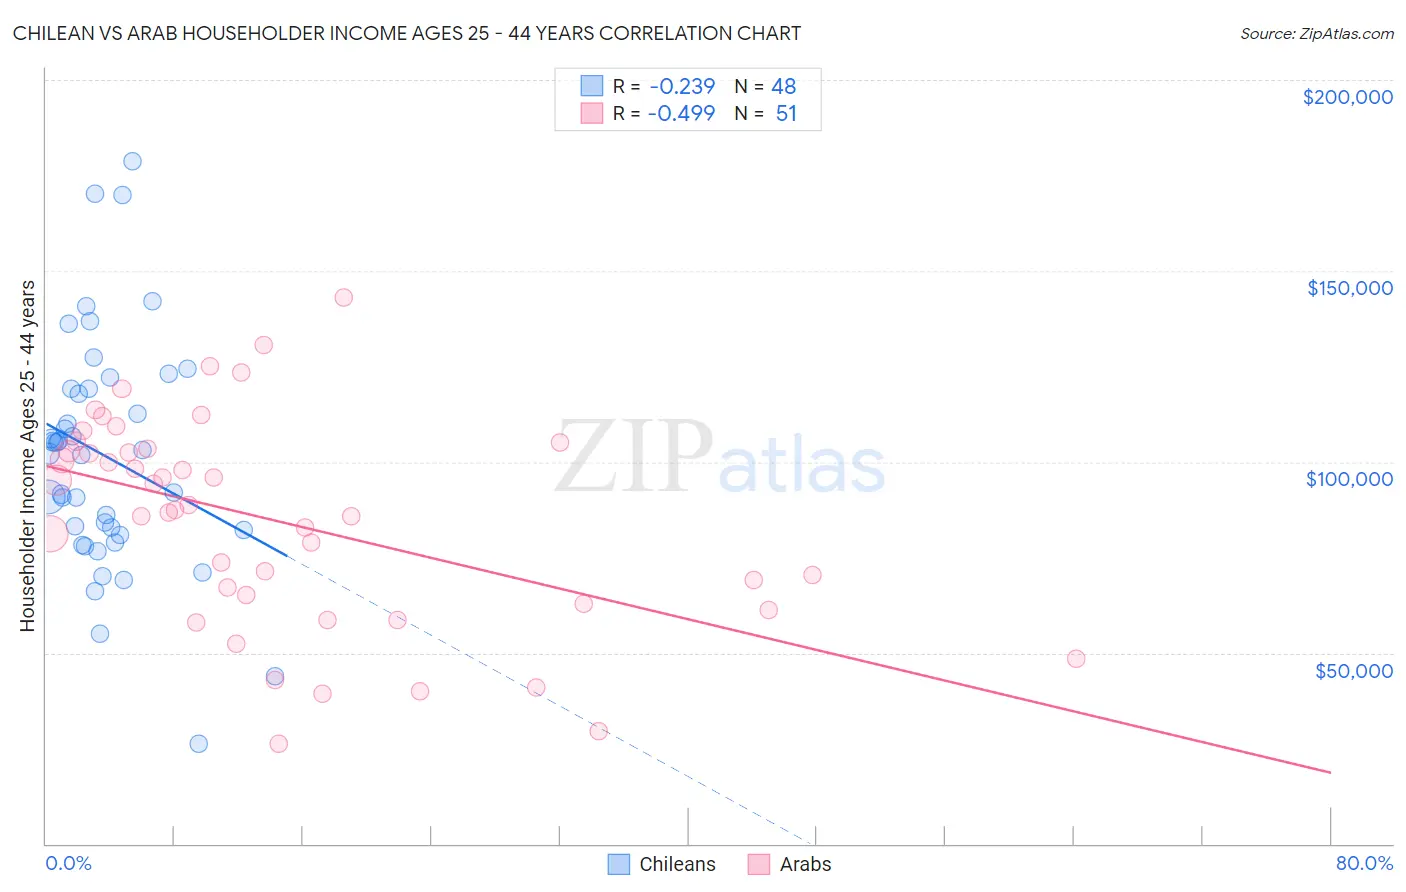 Chilean vs Arab Householder Income Ages 25 - 44 years